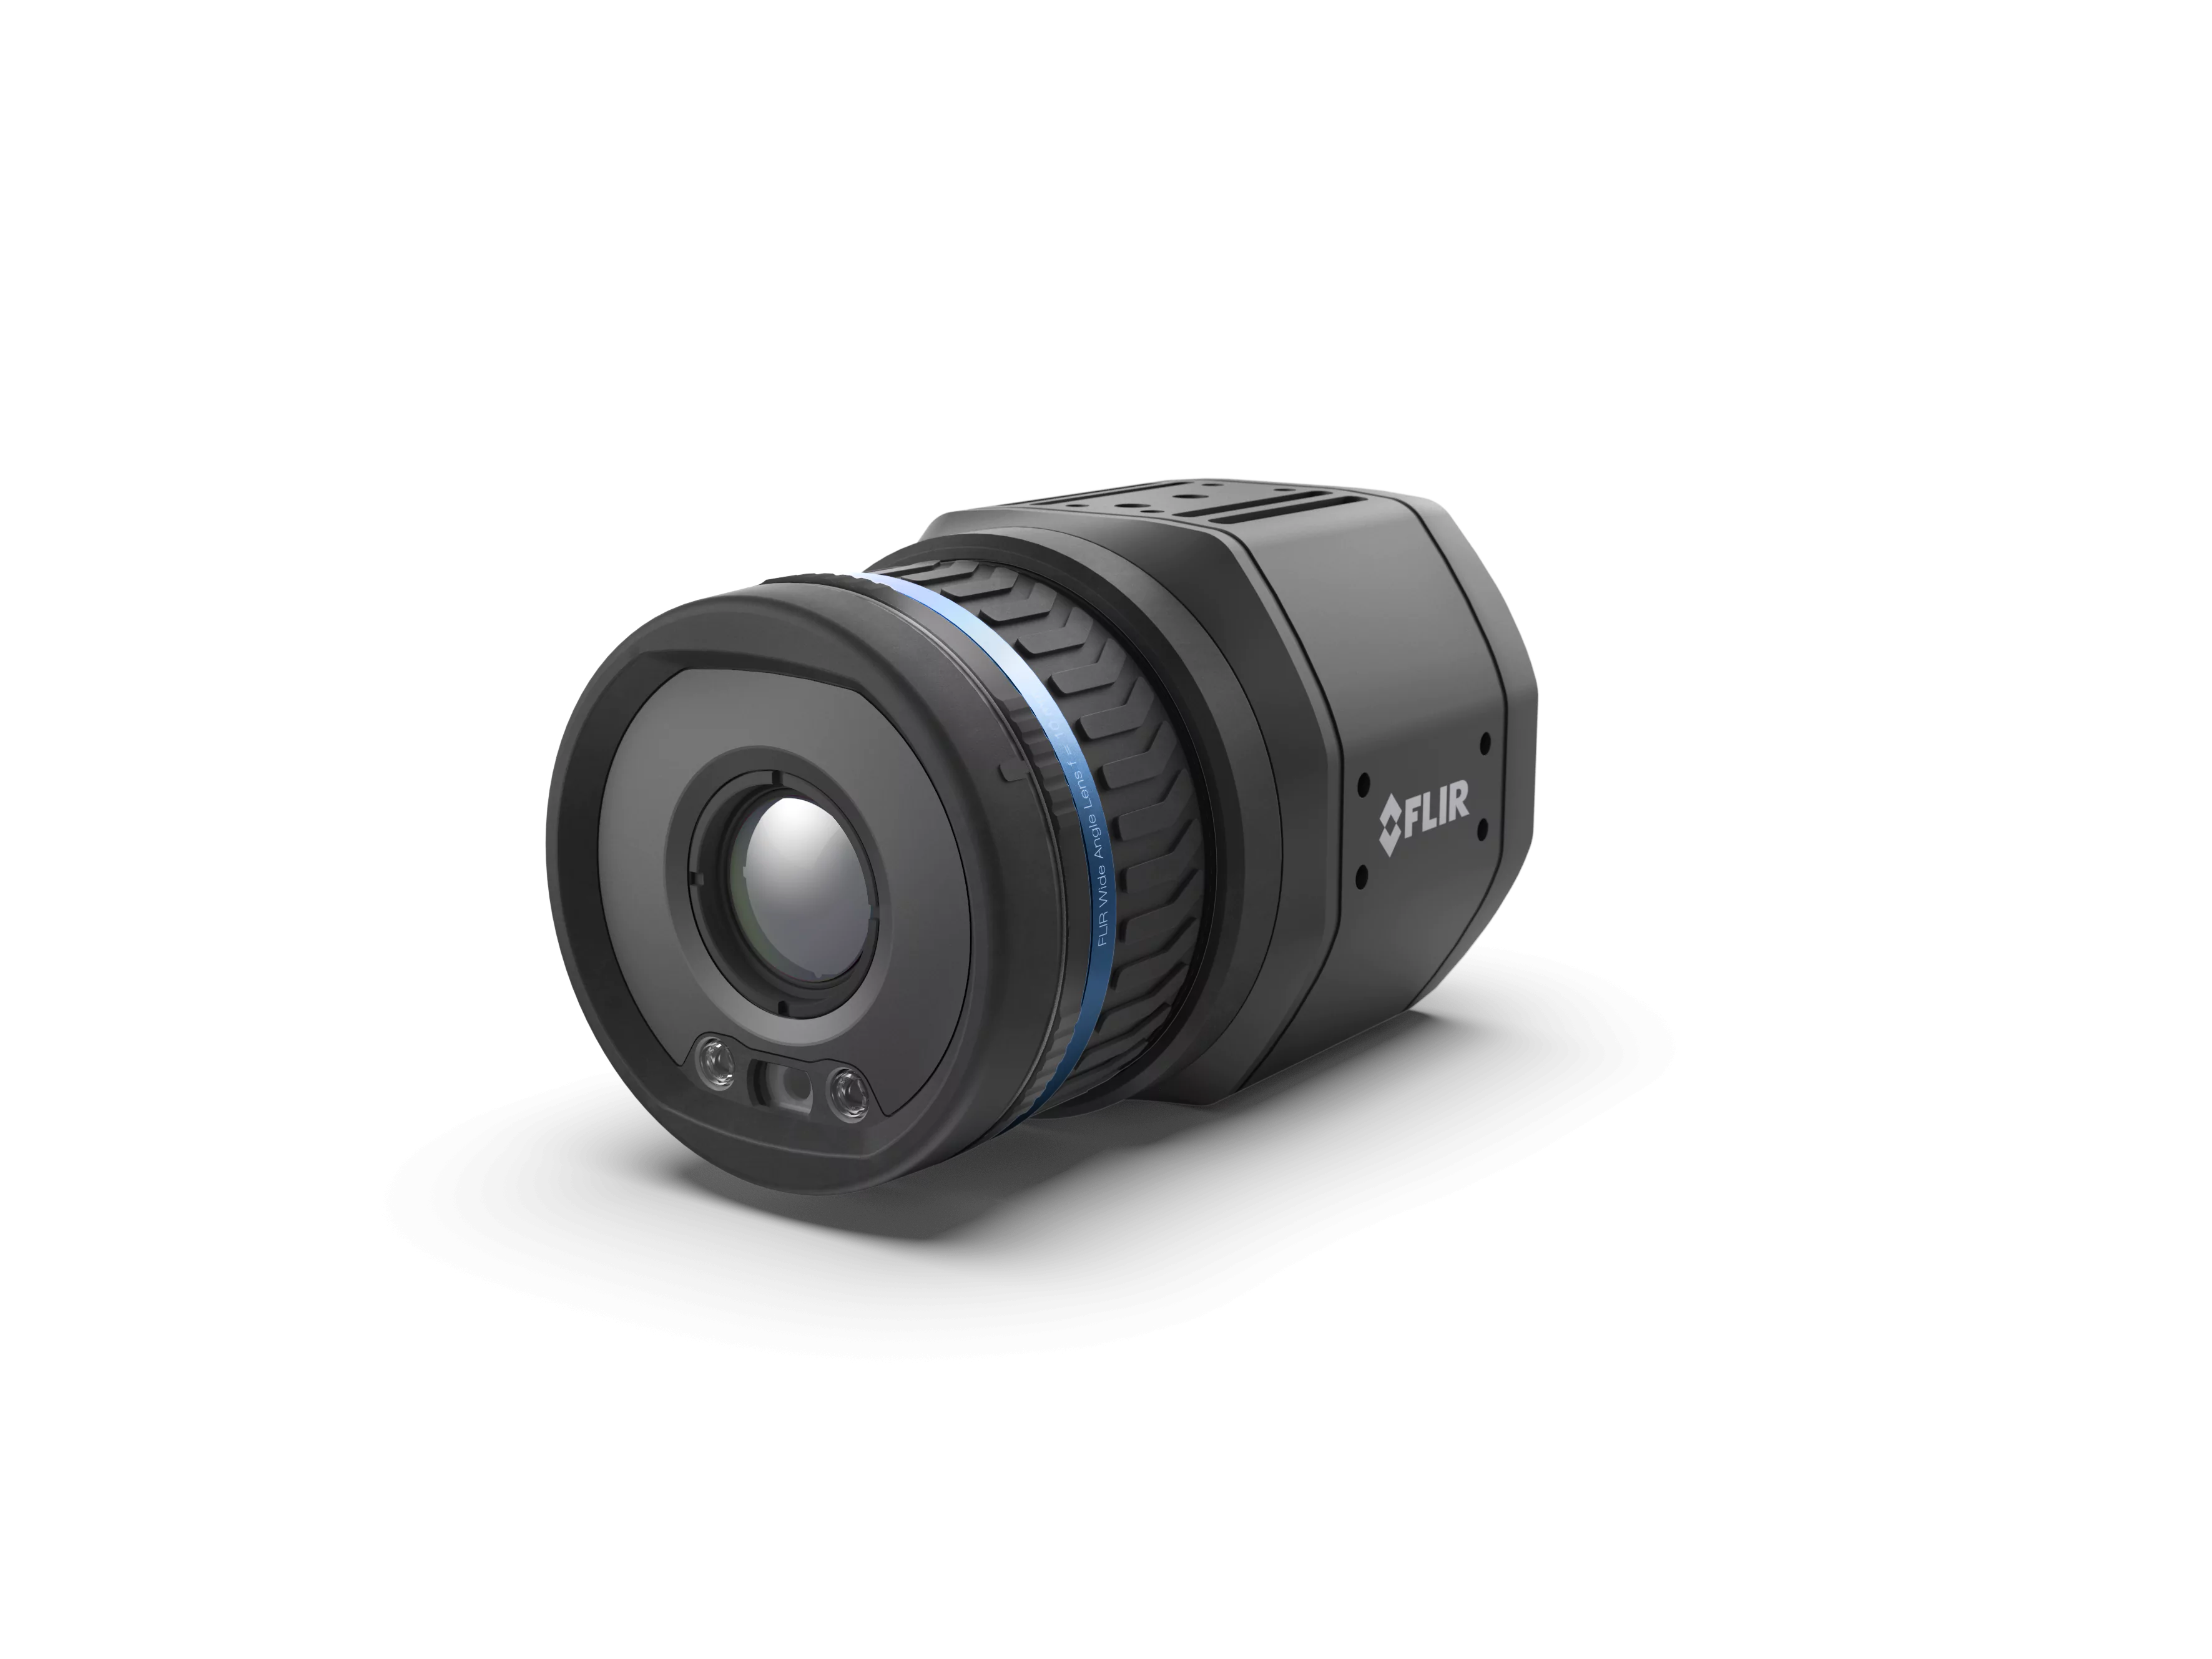 https://www.thermoconcept-sarl.com/wp-content/uploads/2020/06/86000-0000-FLIR-A400_A700-Series-Camera_Front-Top.png